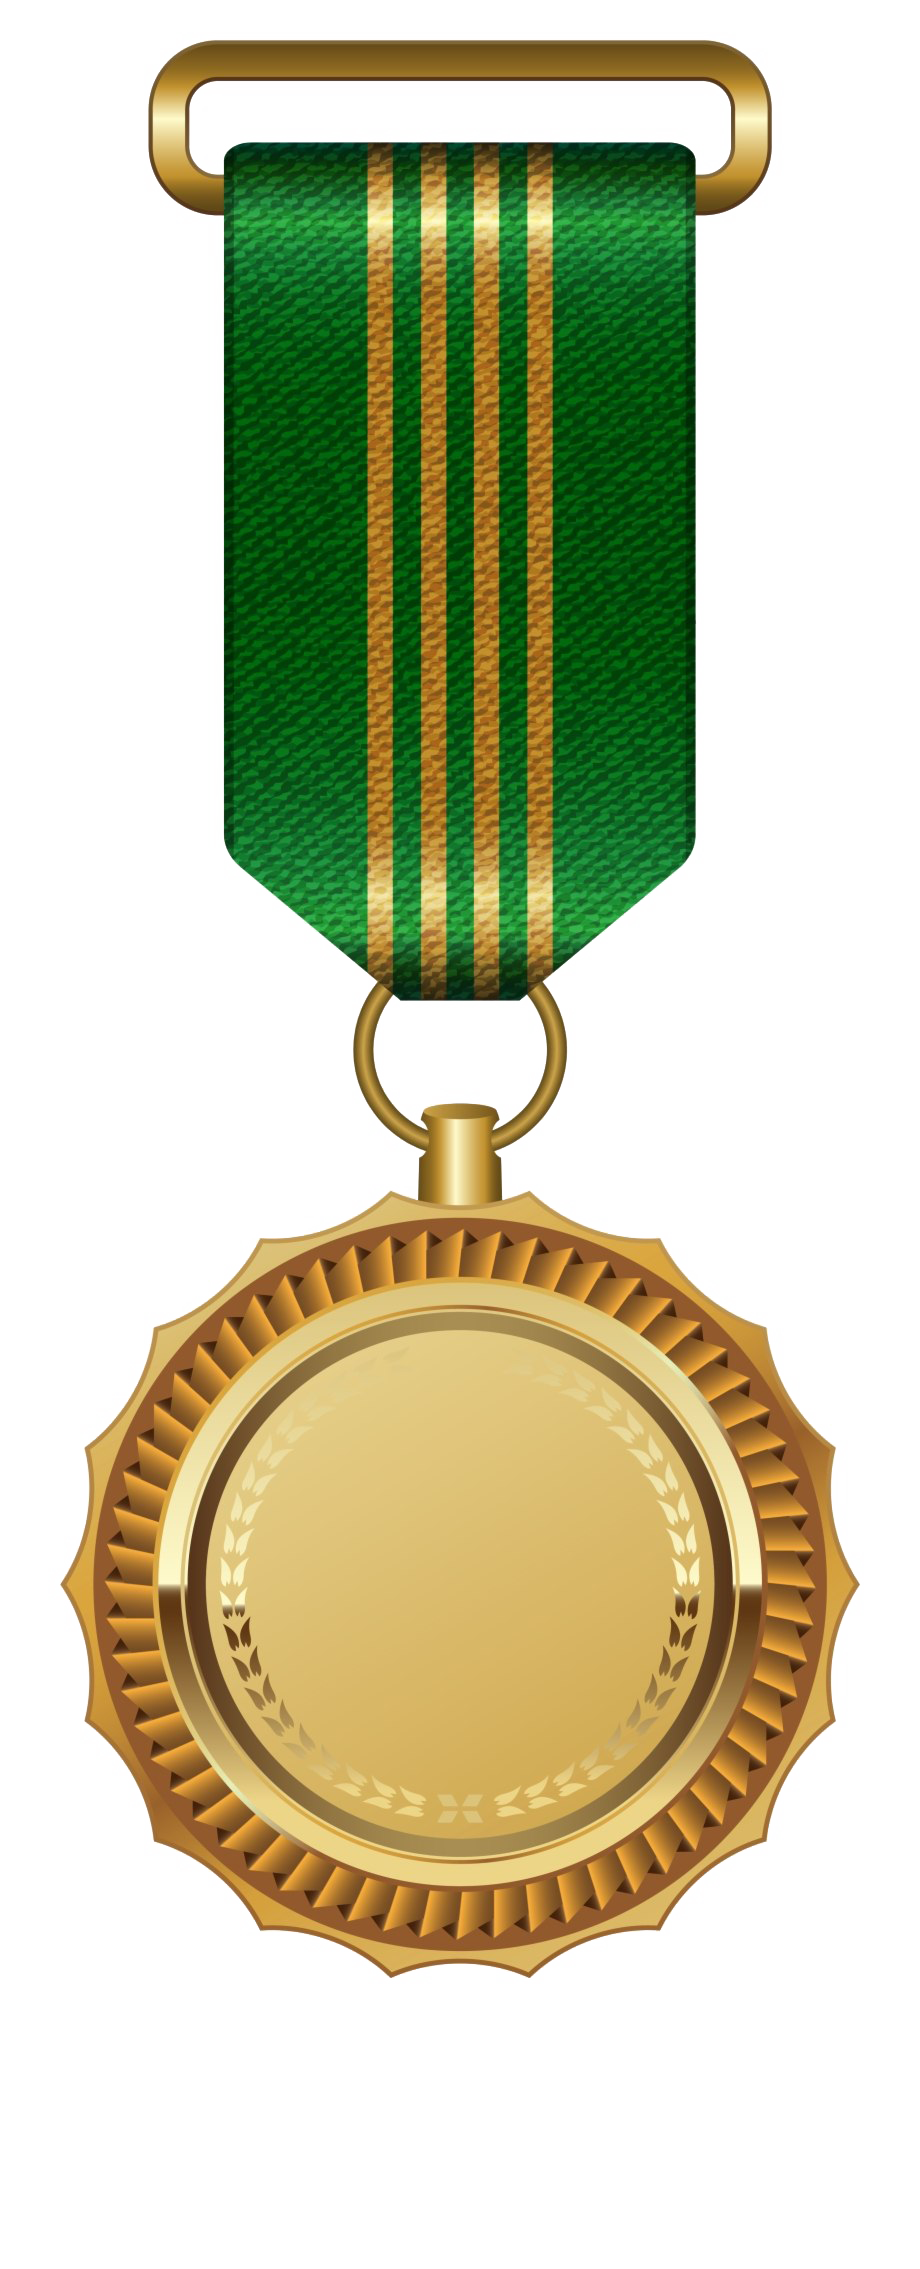 Medal PNG Image in High Definition